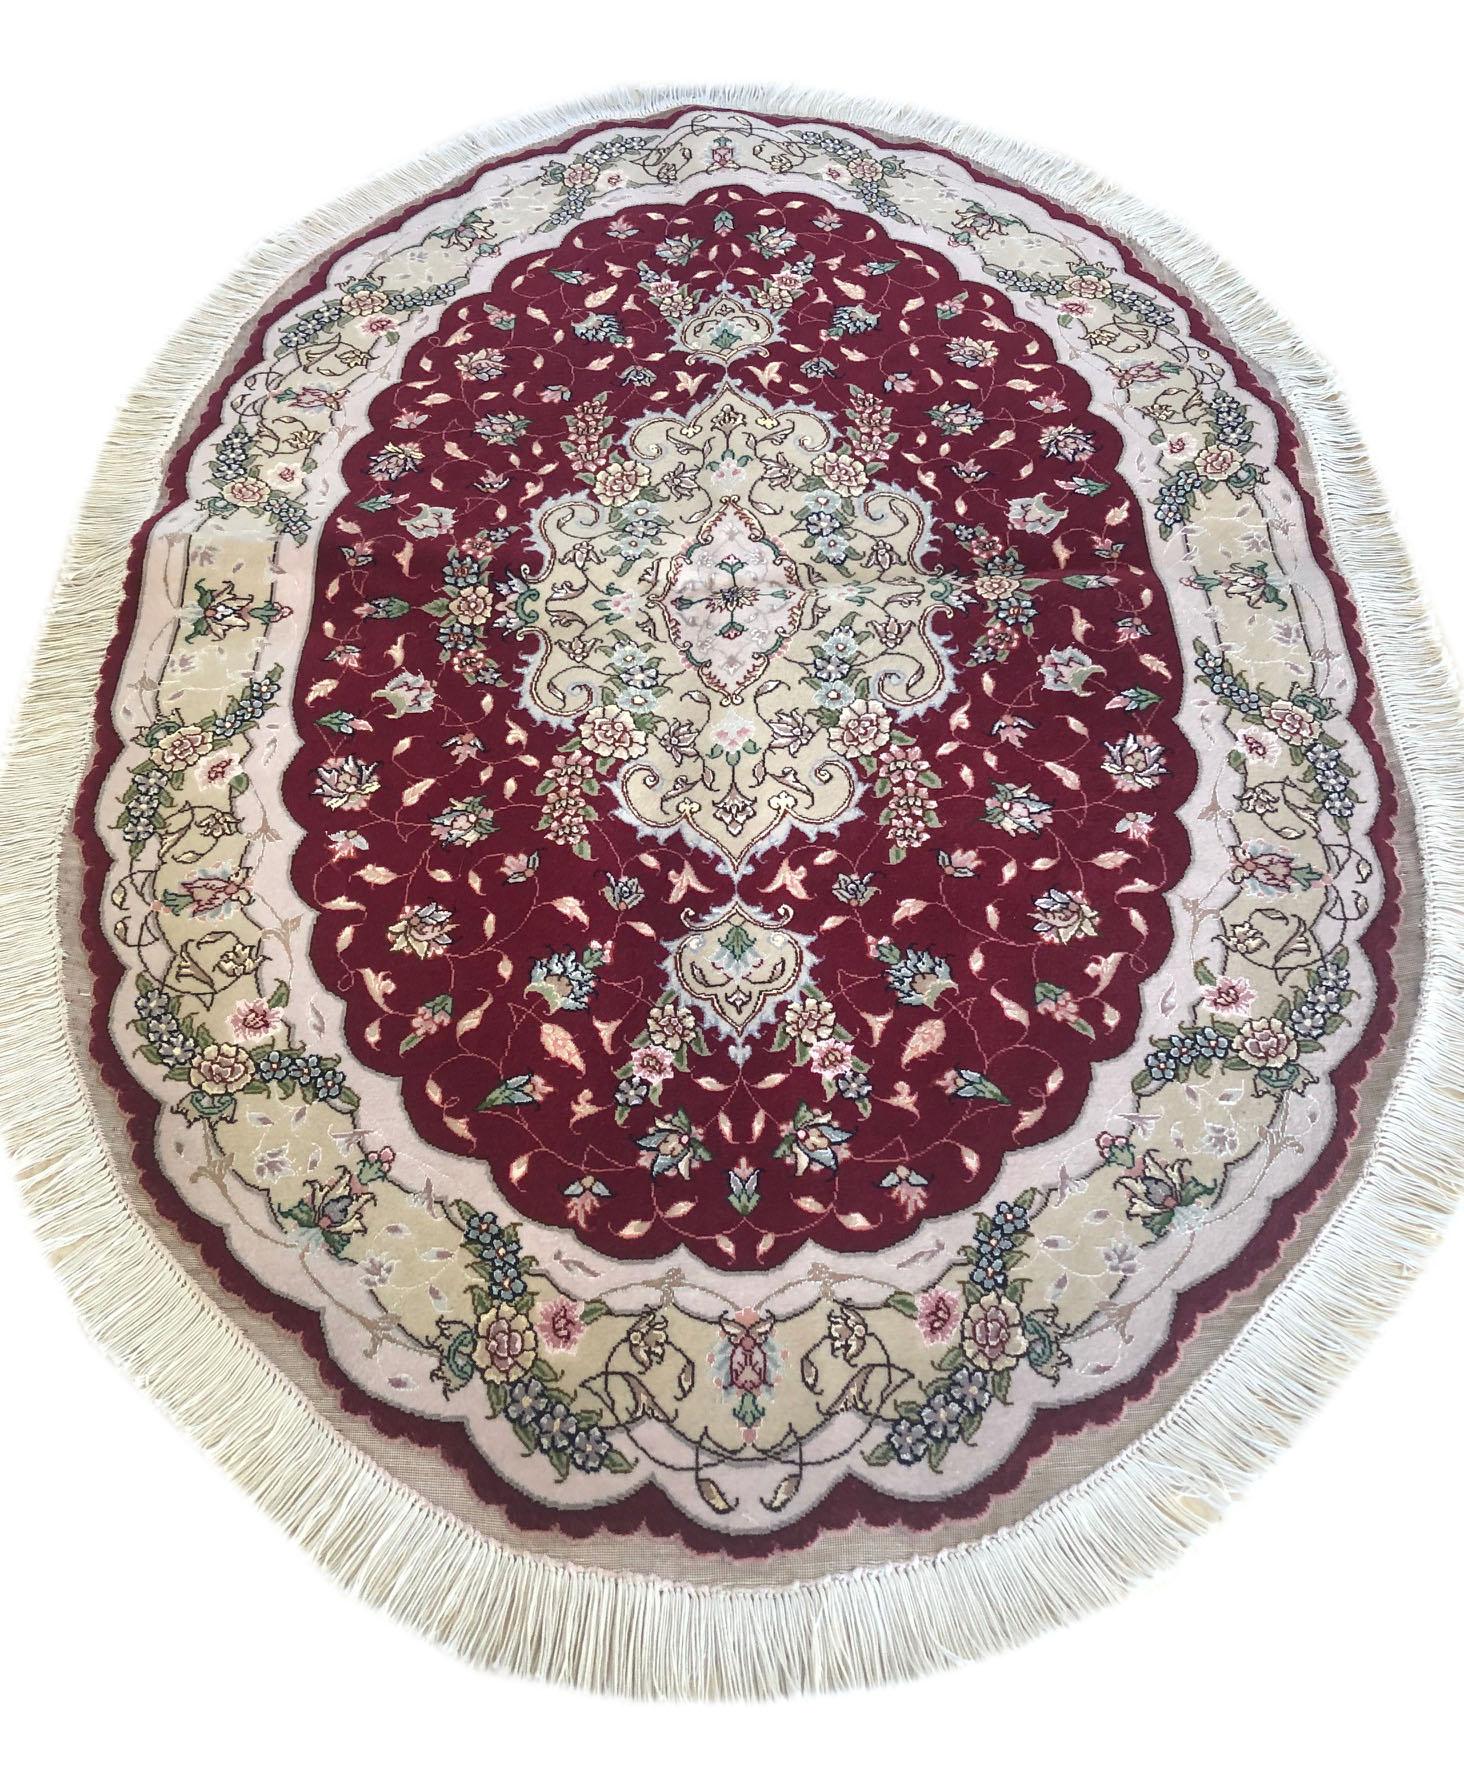 This authentic Persian handmade runner has wool and silk pile with cotton foundation. This beautiful rug is from Tabriz and the design is medallion, floral. The base color is cream and the border is cream. The size is 3 feet 3 inch by 4 feet 9 inch.